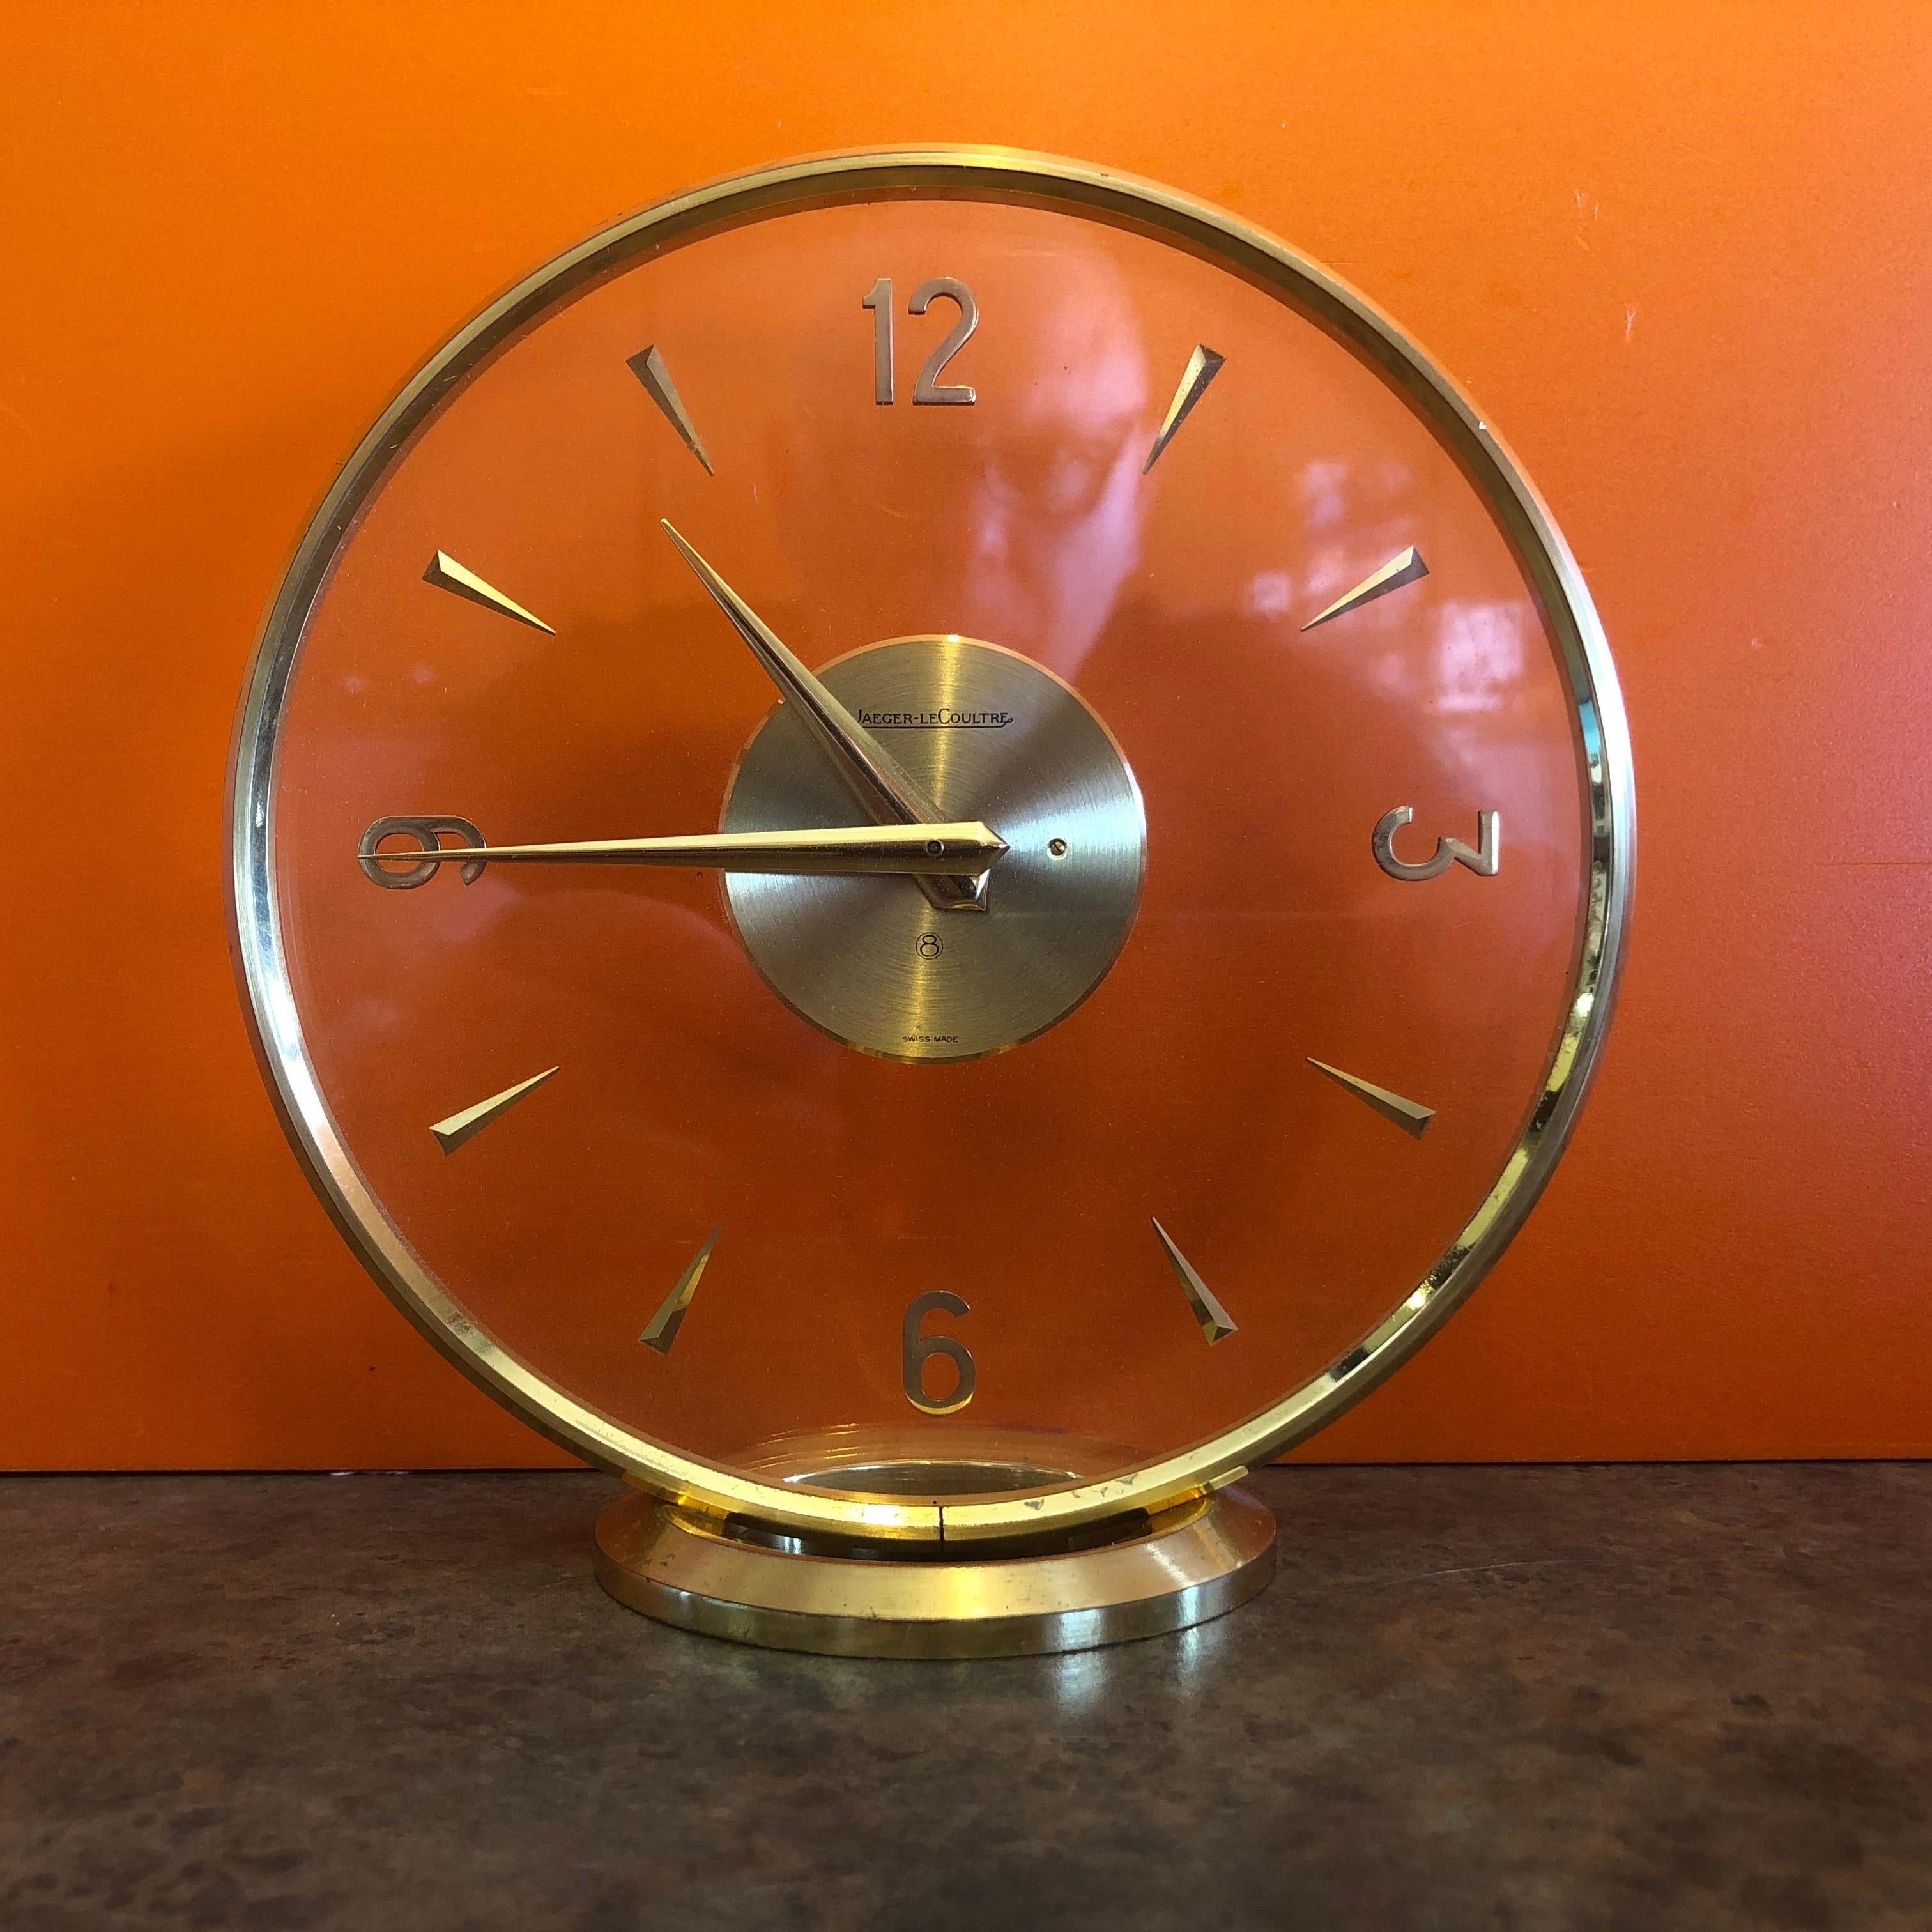 Lovely vintage brass eight day mystery desk clock by Jeager-LeCoultre, circa 1960s. The clock is Swiss made and has the model number #334 on the underside. The piece has an innovative case construction with two crystals; the back crystal is holding